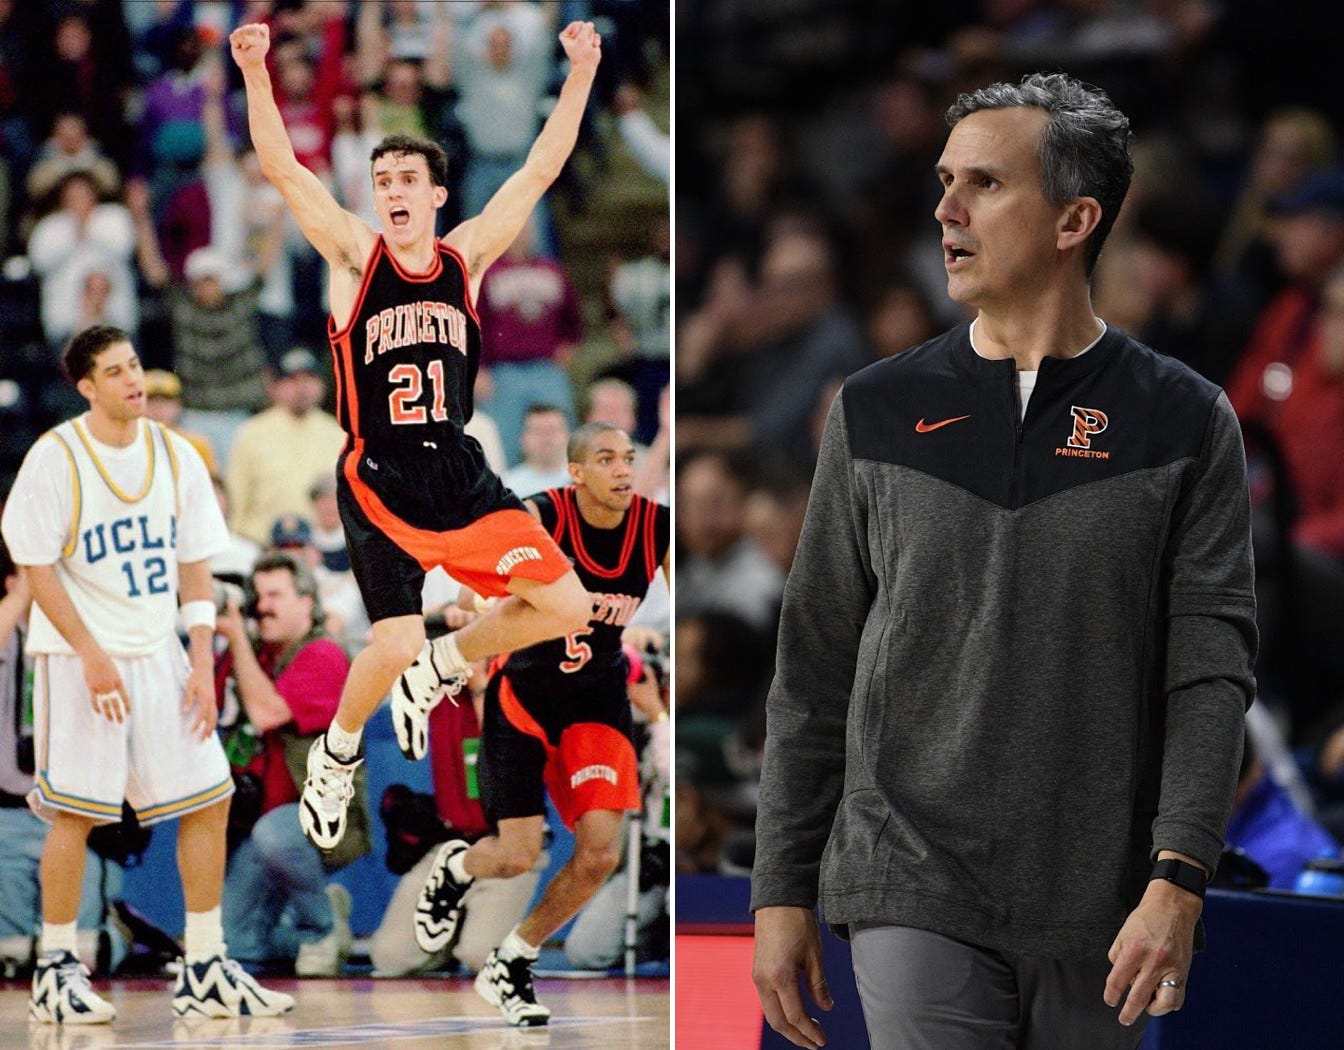 Mitch Henderson played for the Princeton team that upset defending national champion UCLA in the 1996 NCAA Tournament and coached the Tigers to their first Sweet 16. (Photos via Twitter @IvyLeague, Wikimedia Commons)